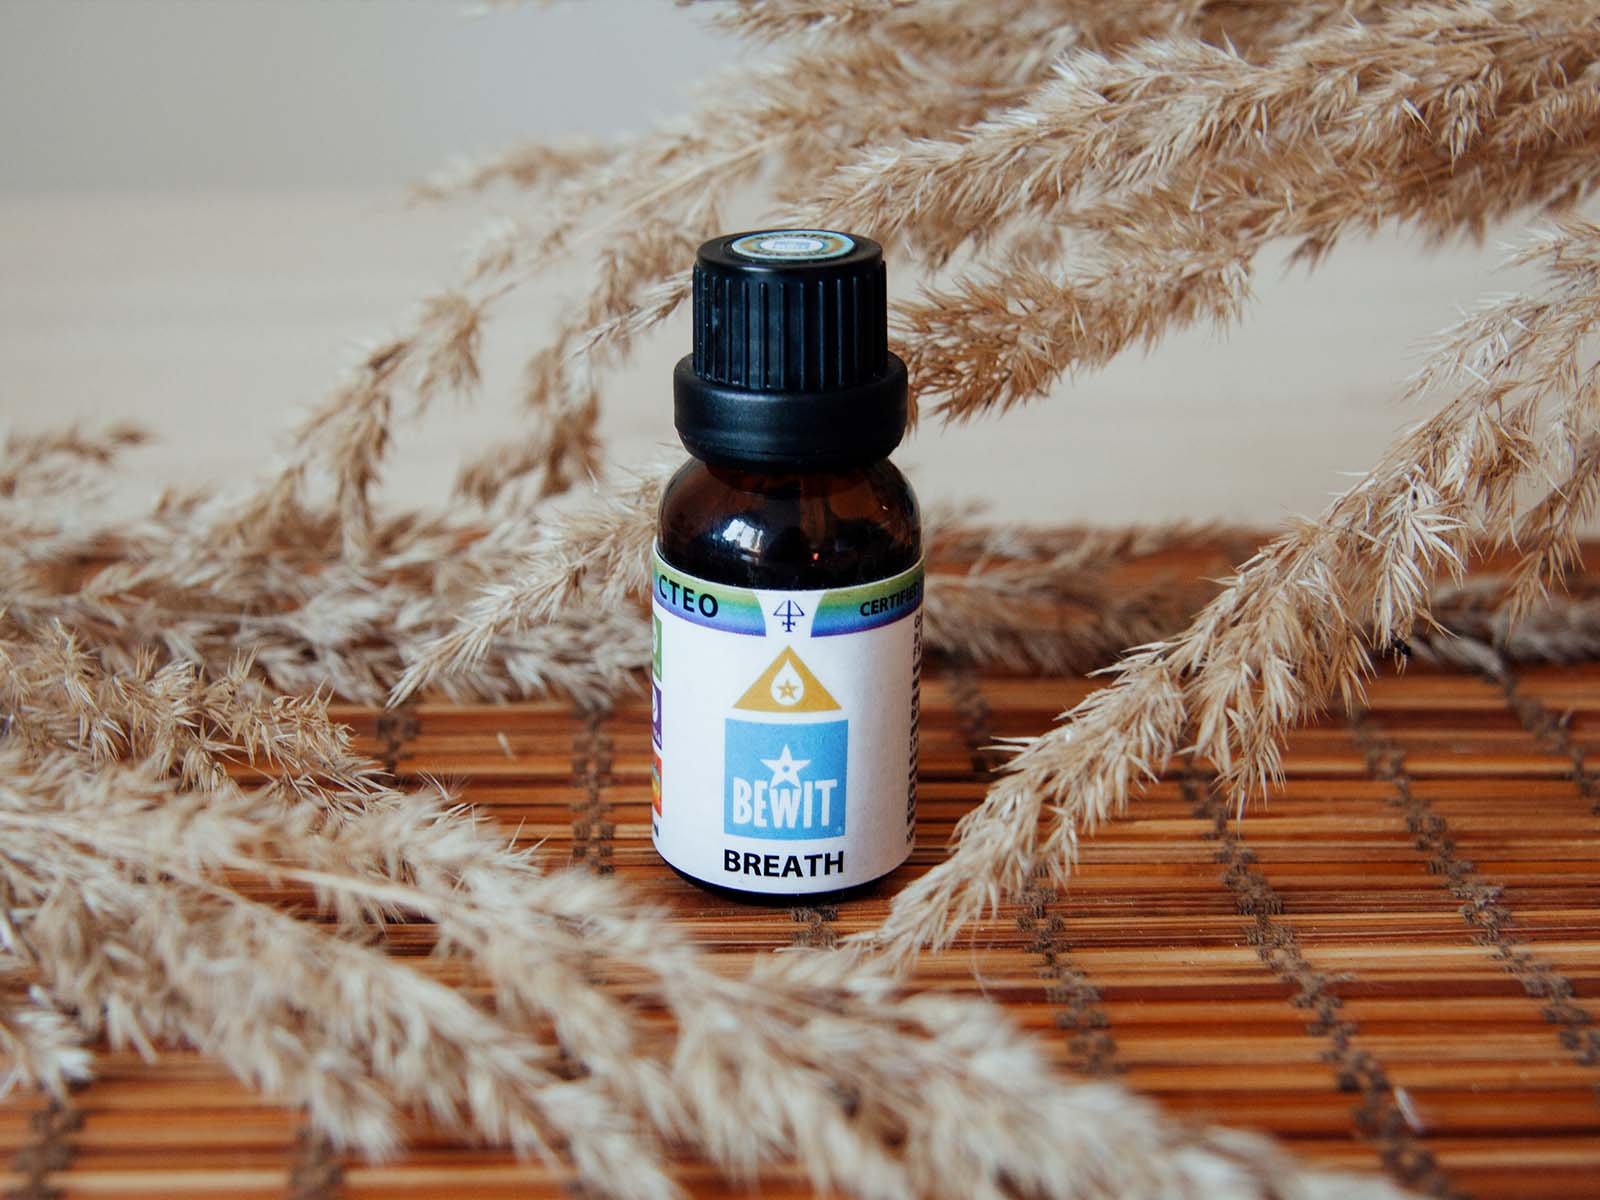 BEWIT BREATH - This is a blend of pure essential oils - 3